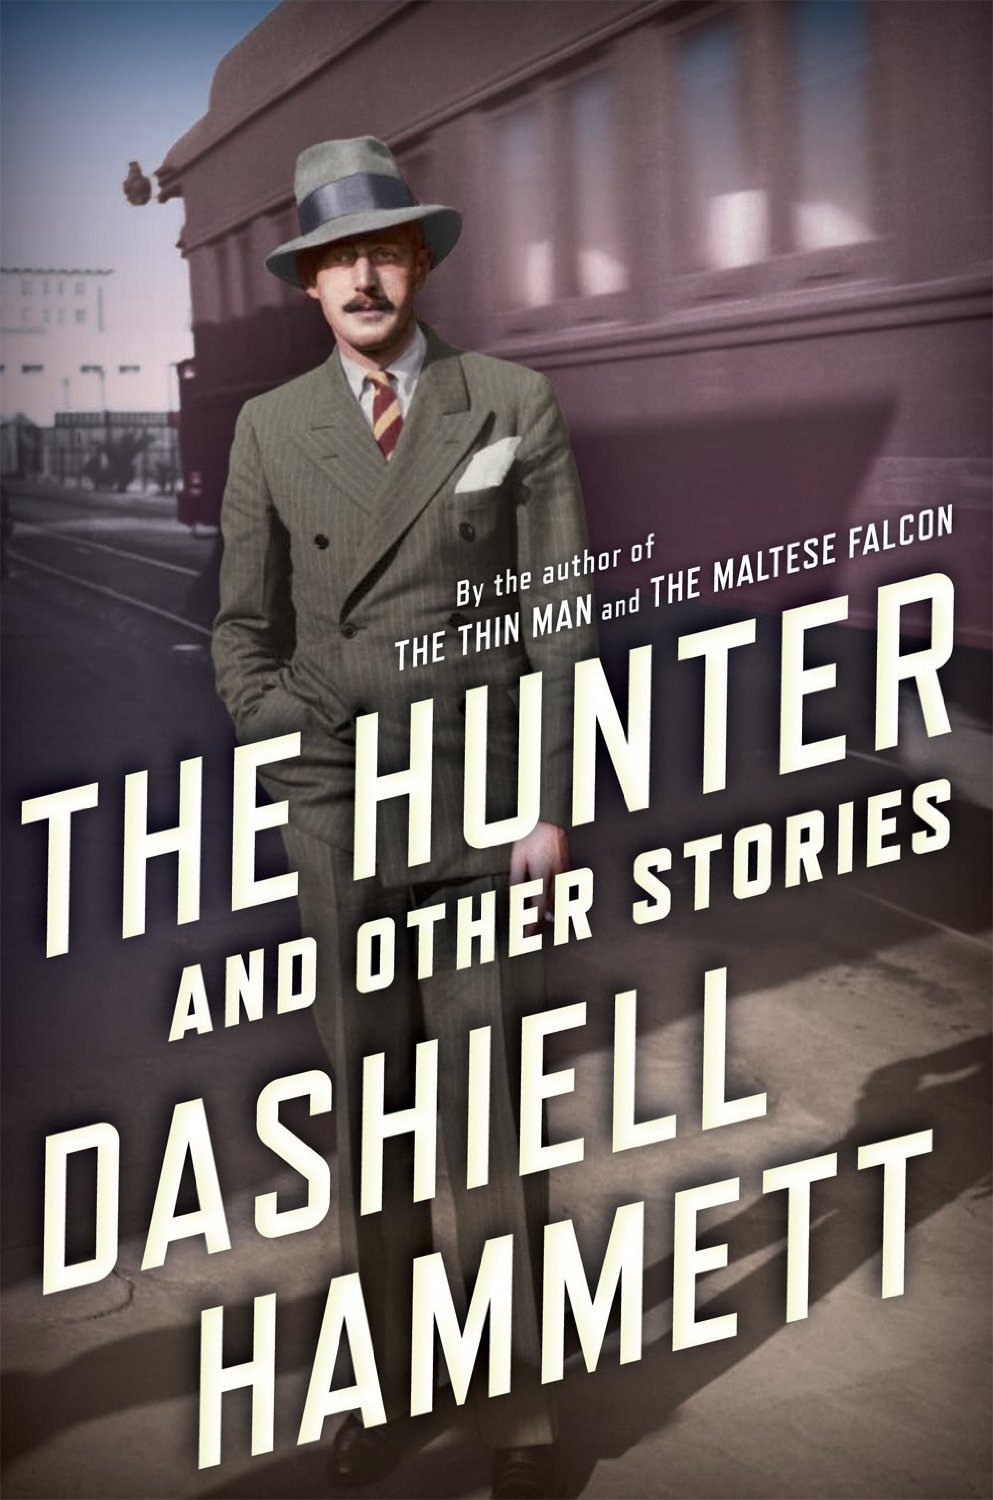 ACCENT: THE HUNTER and Other Stories by Dashiell Hammett